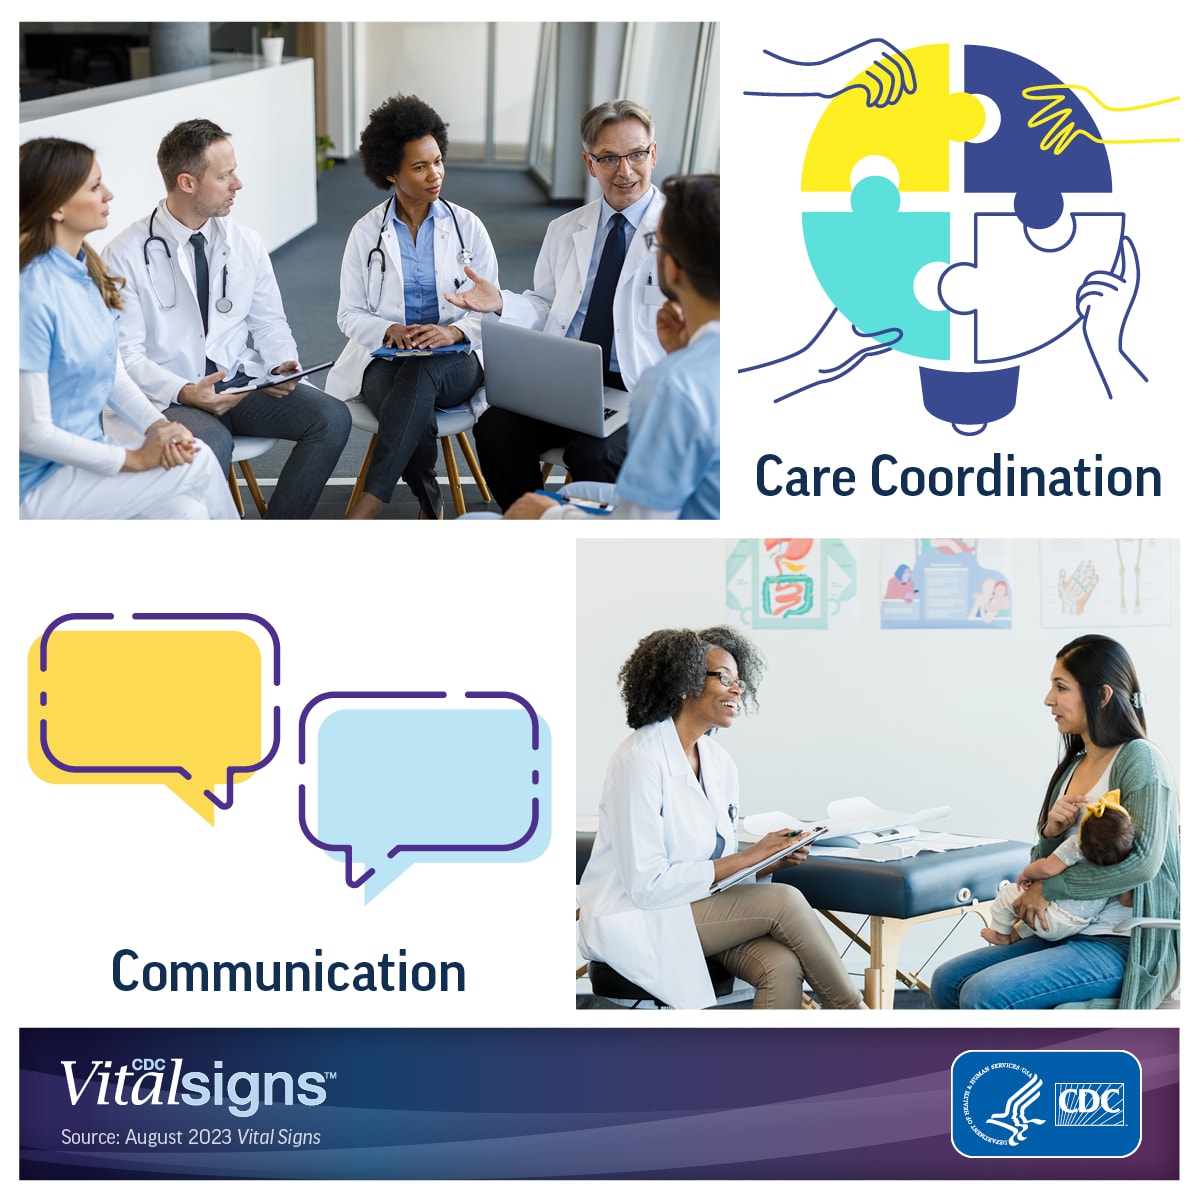 Collage of a group of doctors having a discussion, puzzle pieces being put together, speech bubbles, and a doctor speaking with a mother holding a child.